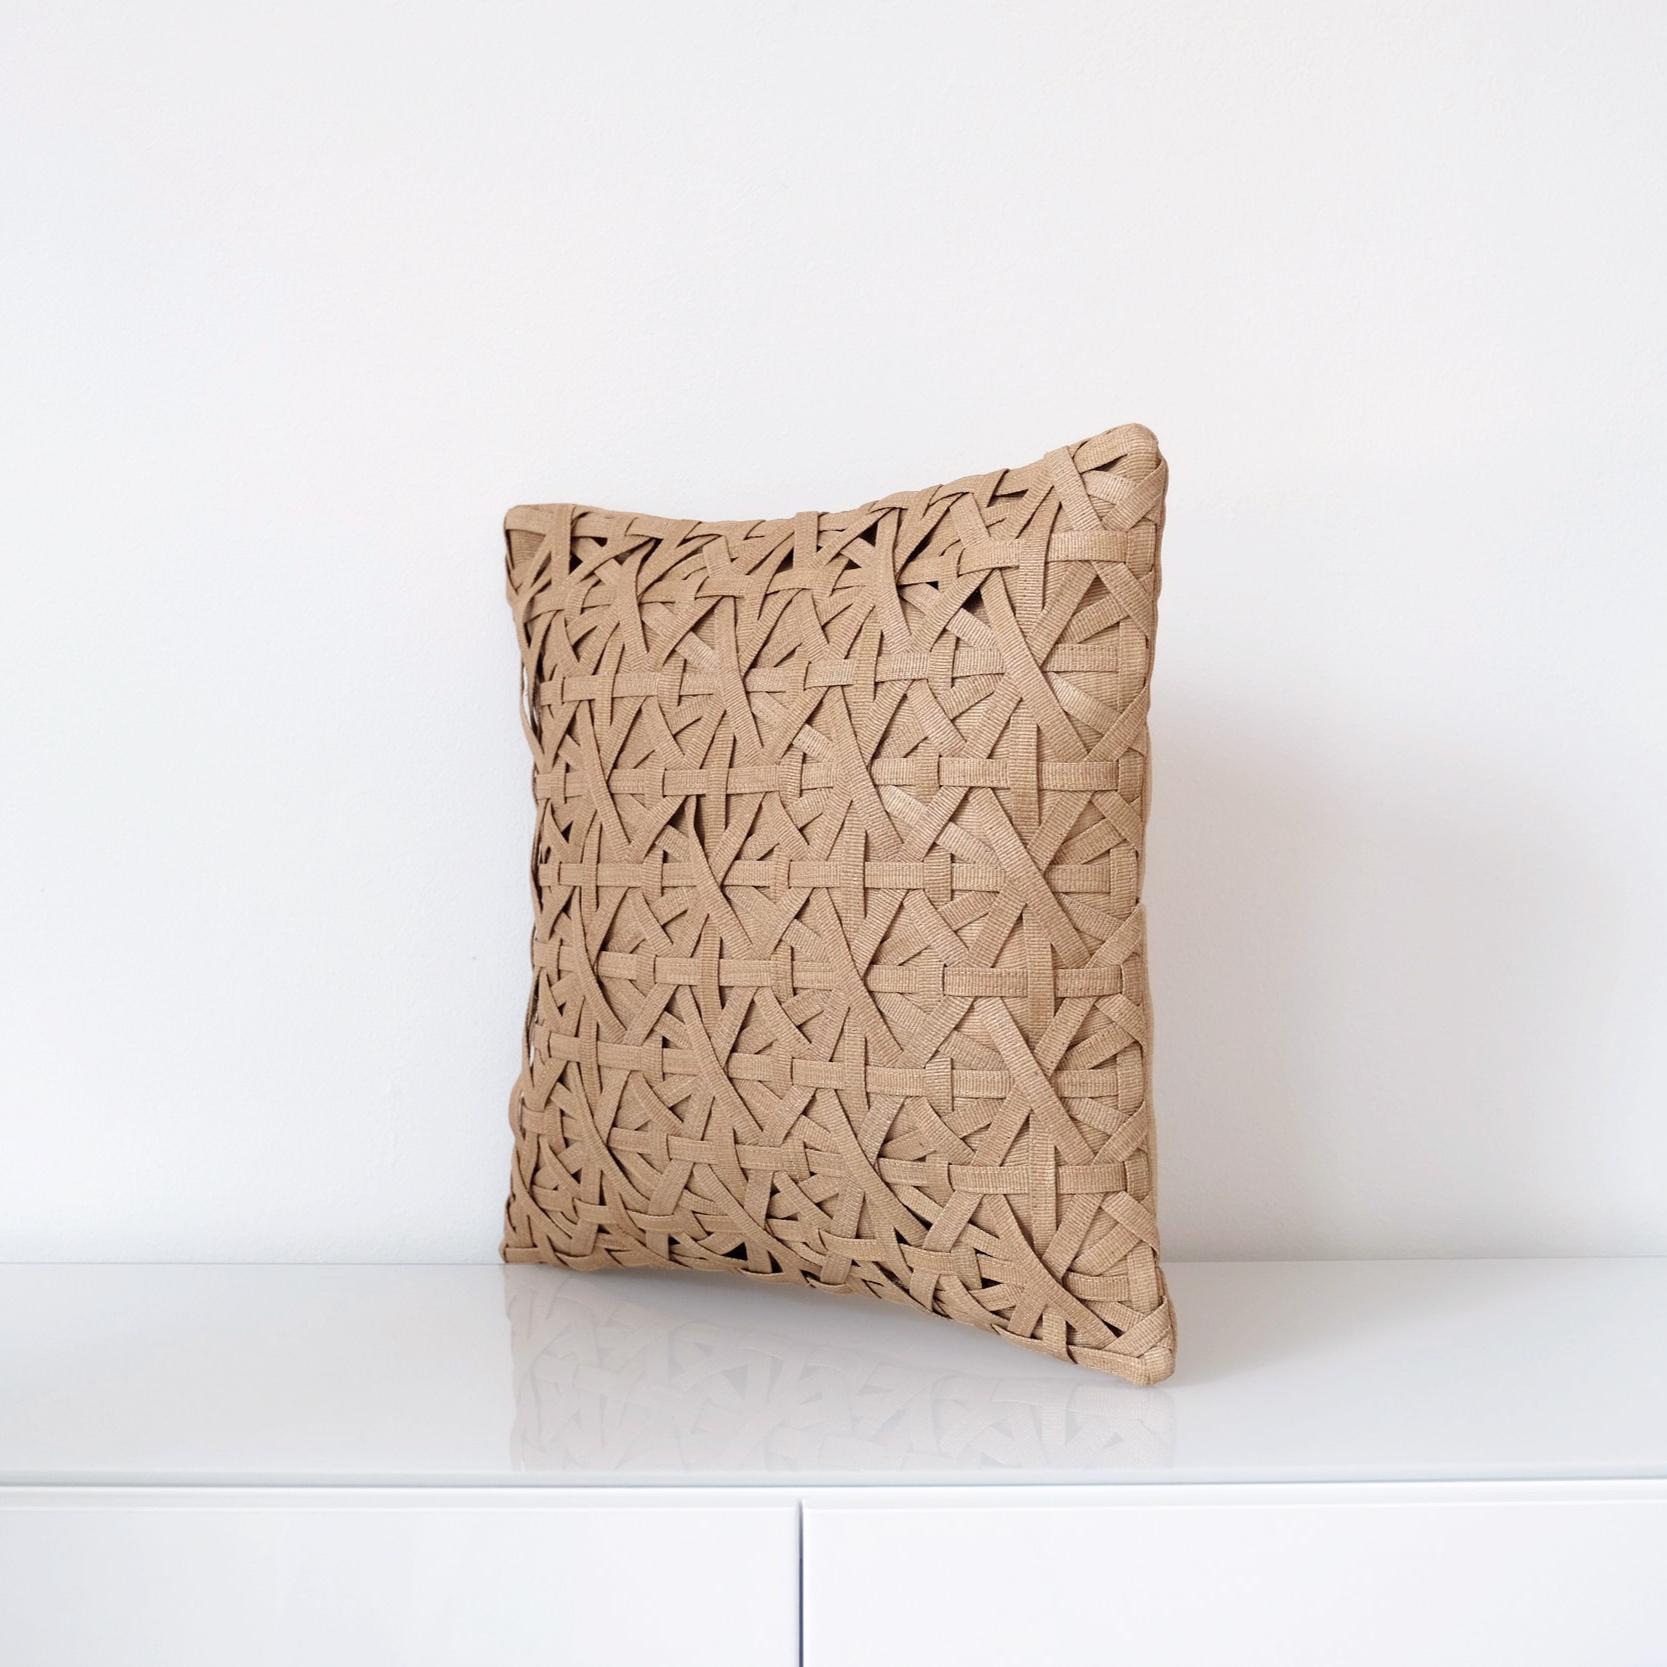 Handcrafted cushion cover made with naturally dyed and delicately woven T’nalak cloth from Abaca fibres and fastened with coconut shell buttons
Colour: light sand and oatmeal

Measures 45 x 45 cm
17.7? x 17.7?
Recommended cushion filler: 56 x